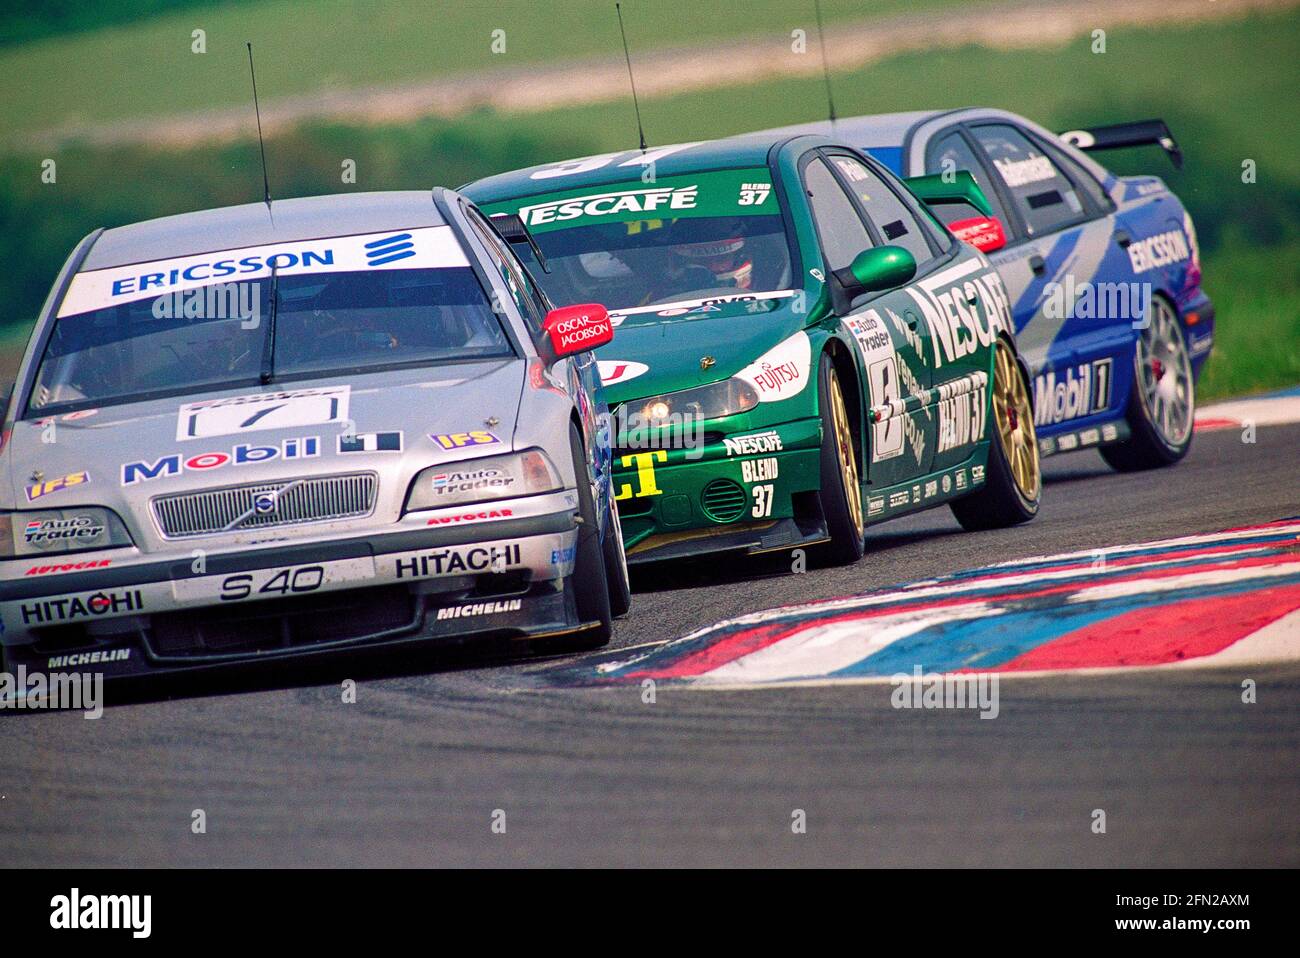 Jason Plato sandwiched in between the Volvo S40s of Rickard Rydell and Vincent Radermecker in his Renault Laguna as they exit Club Chicane in the British Touring Car Championship of 1999 at Thruxton circuit England. Stock Photo